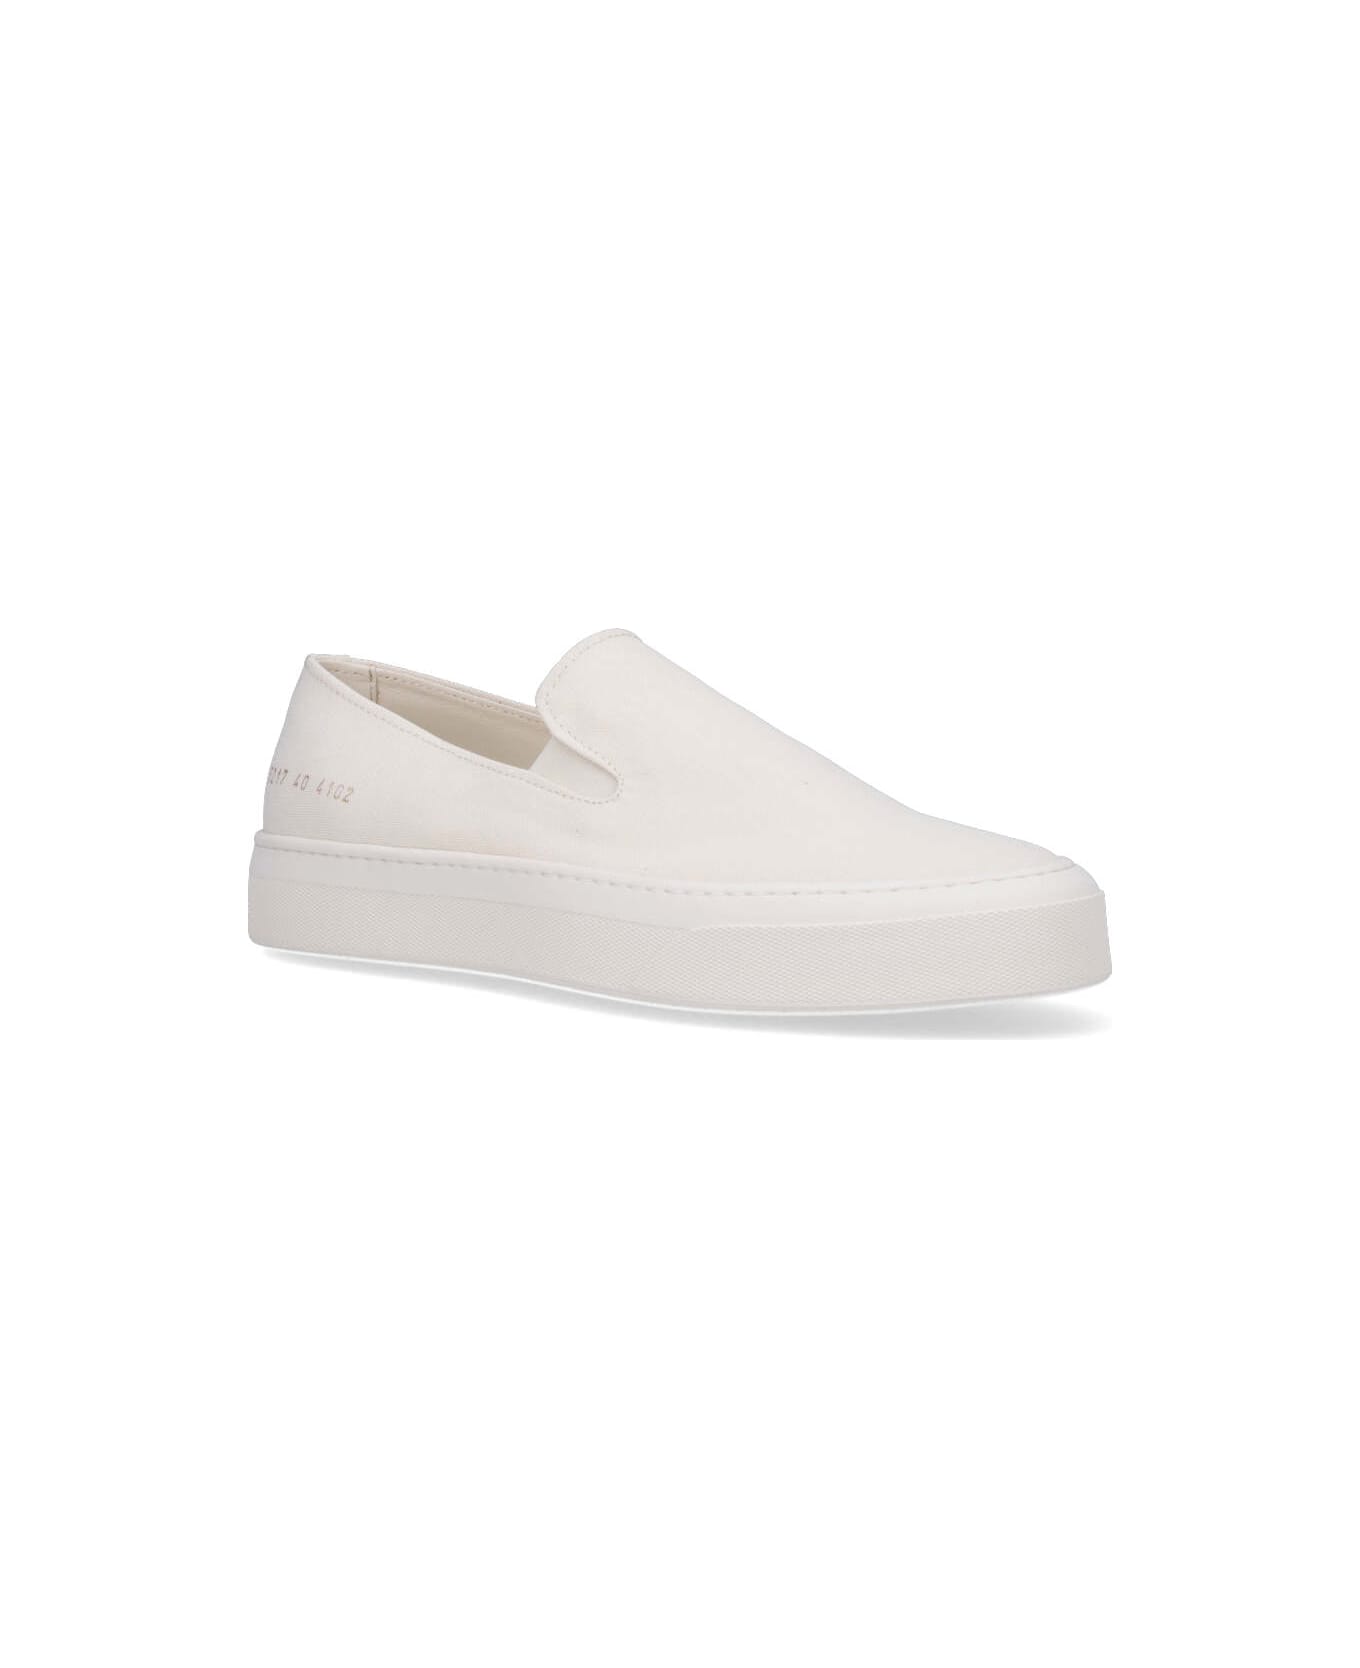 Common Projects Sneakers - Cream